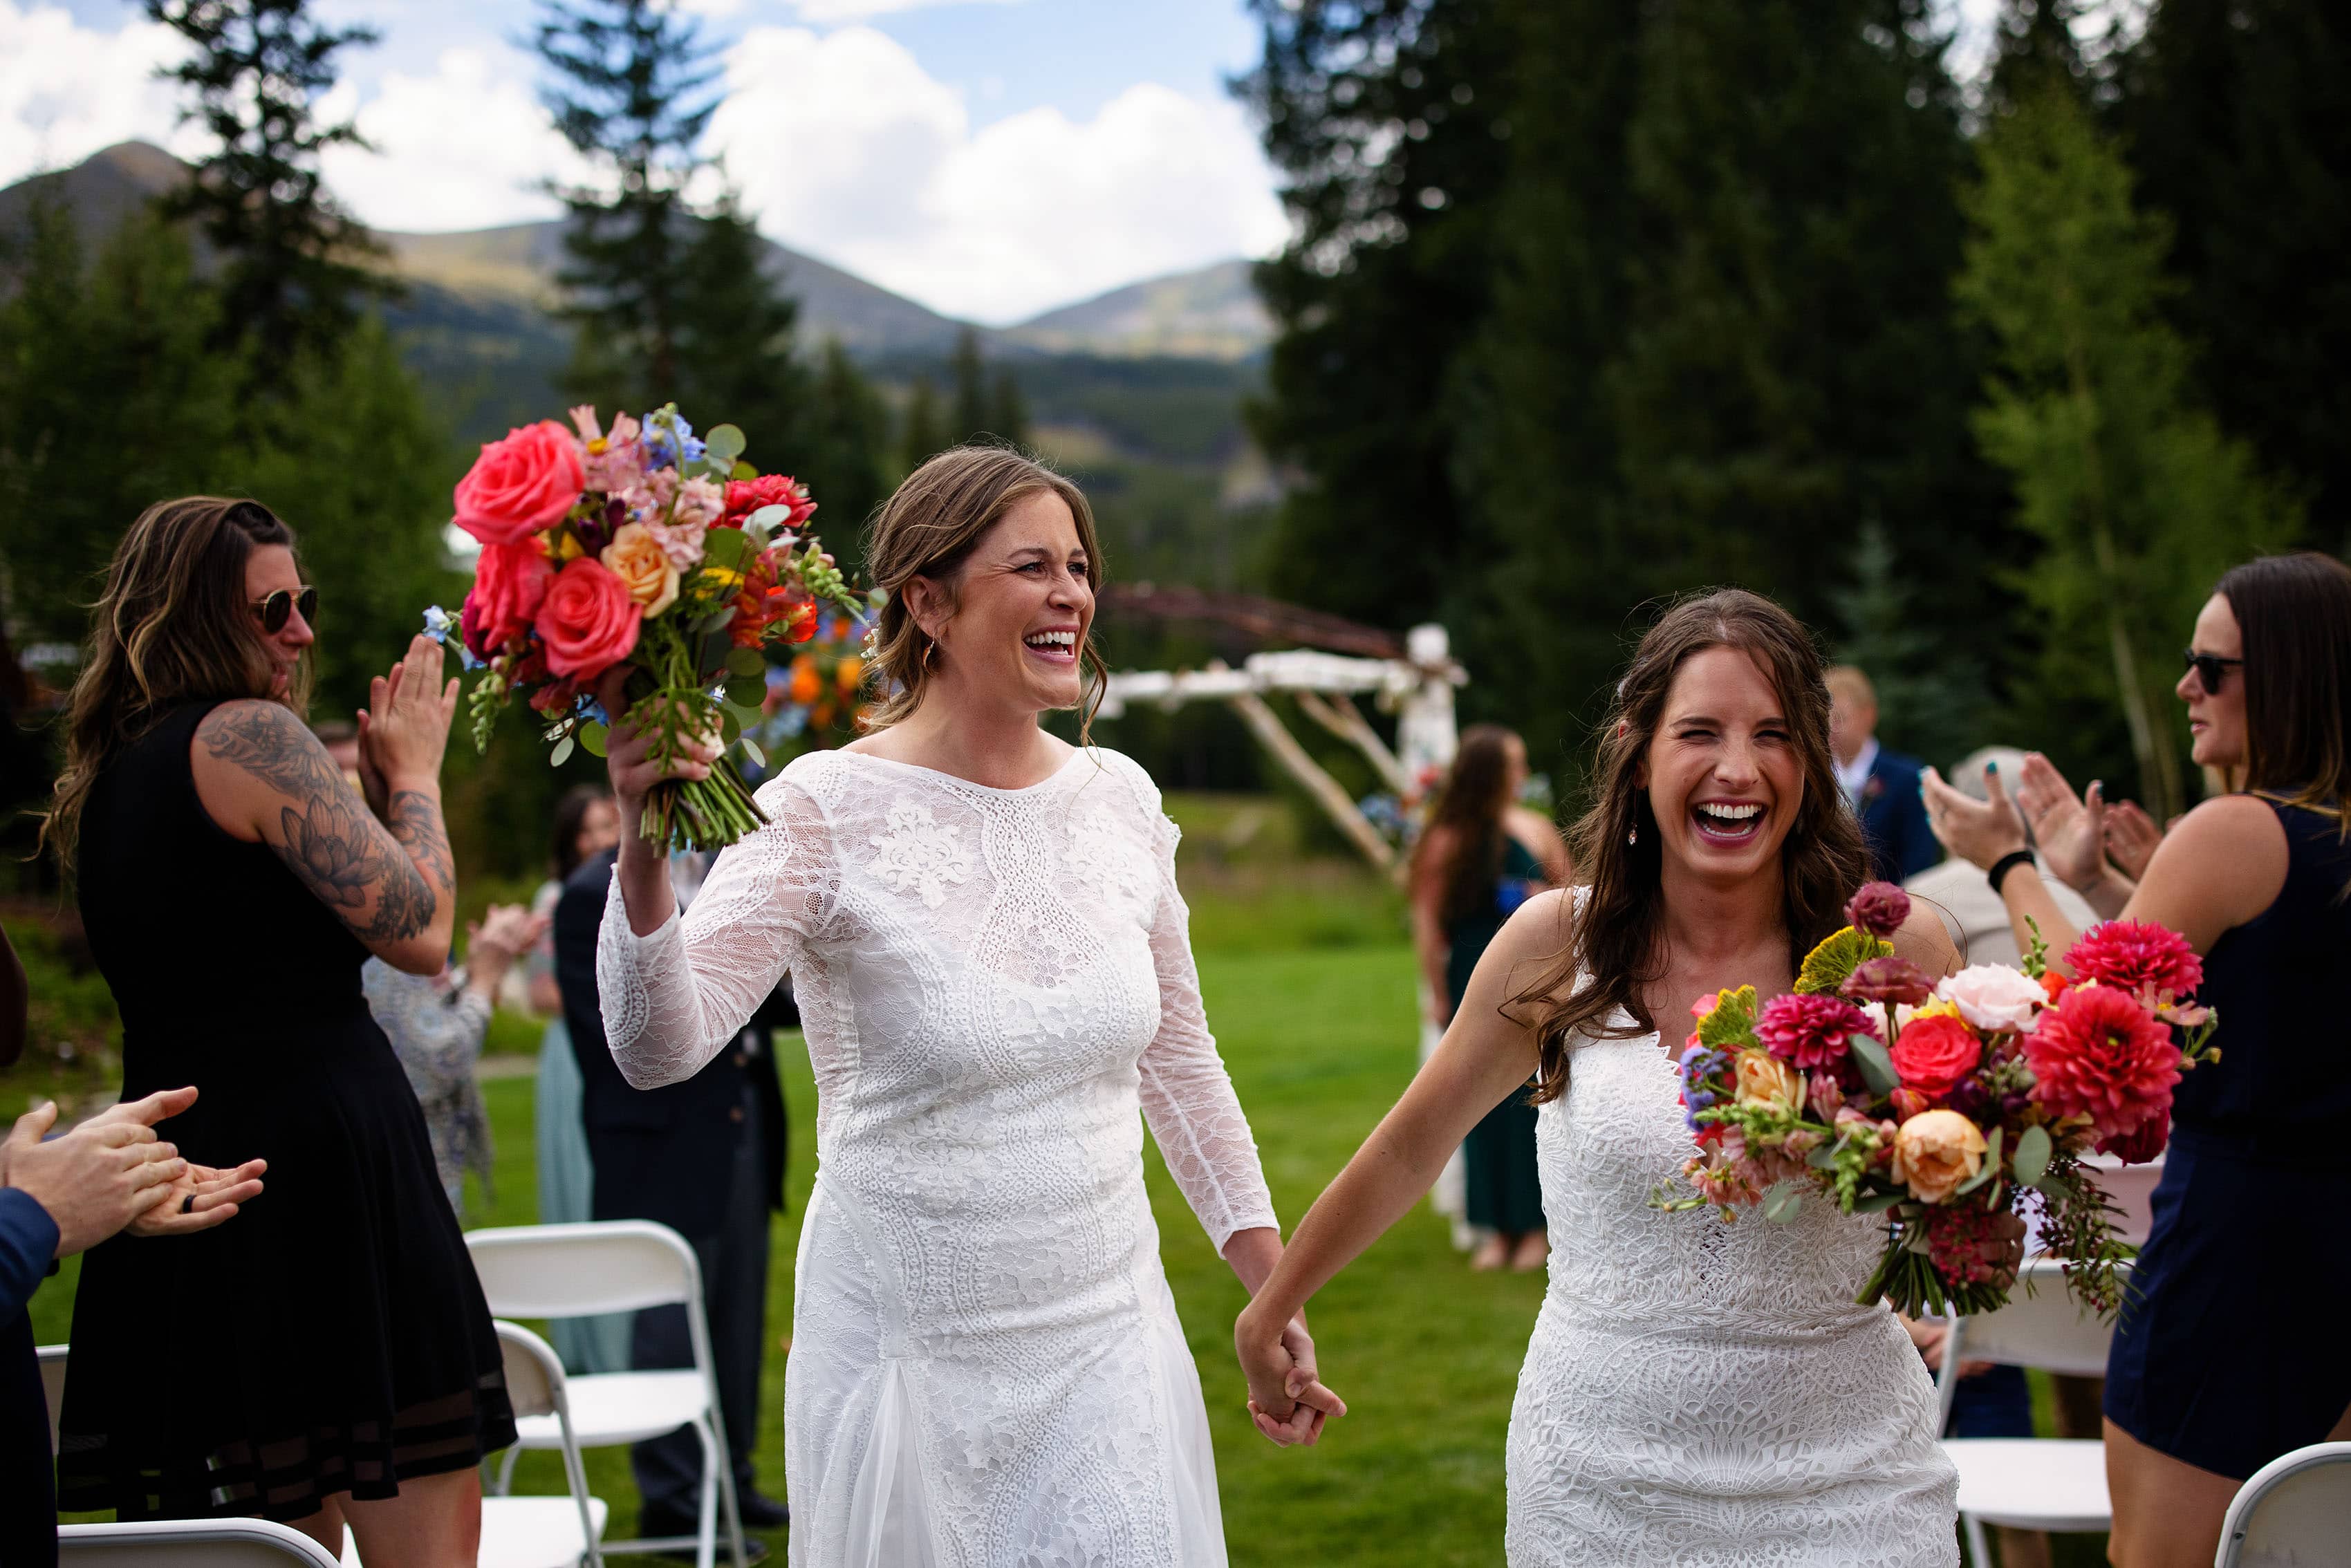 Cait and Anna celebrate as they walk down the aisle